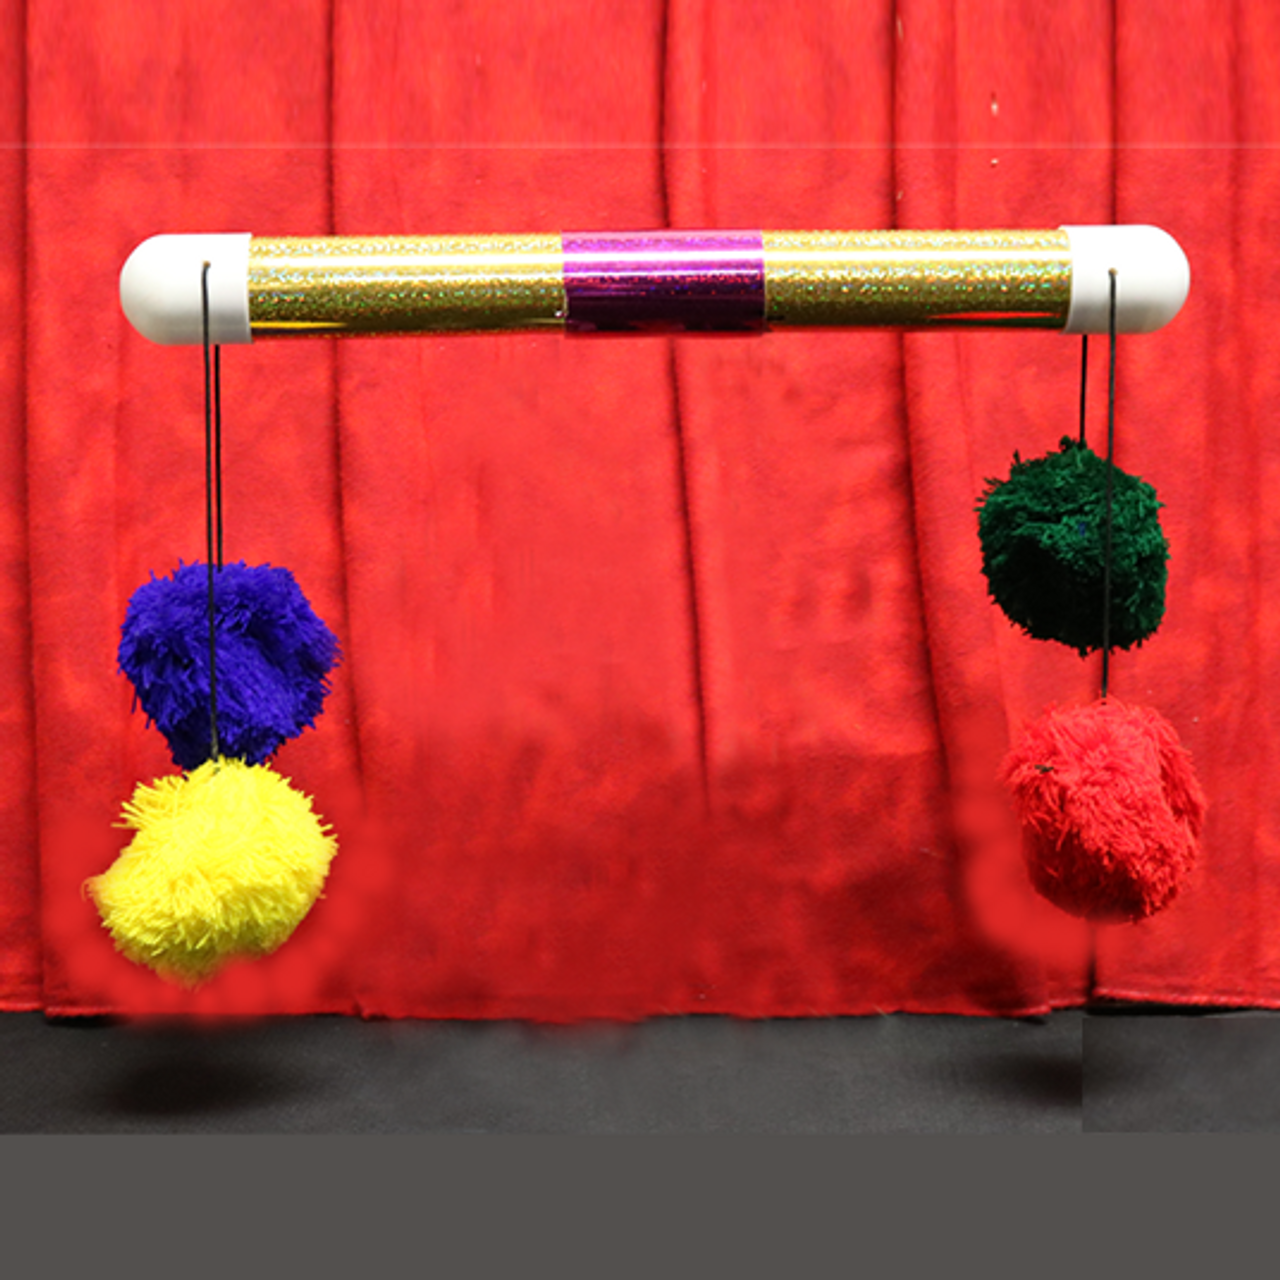 image of a long thin glittery golden tube with a connector in the middle, allowing it to pull apart. Both ends of the tube have two pieces of string hanging out, with a different coloured pom pom at the end of each.